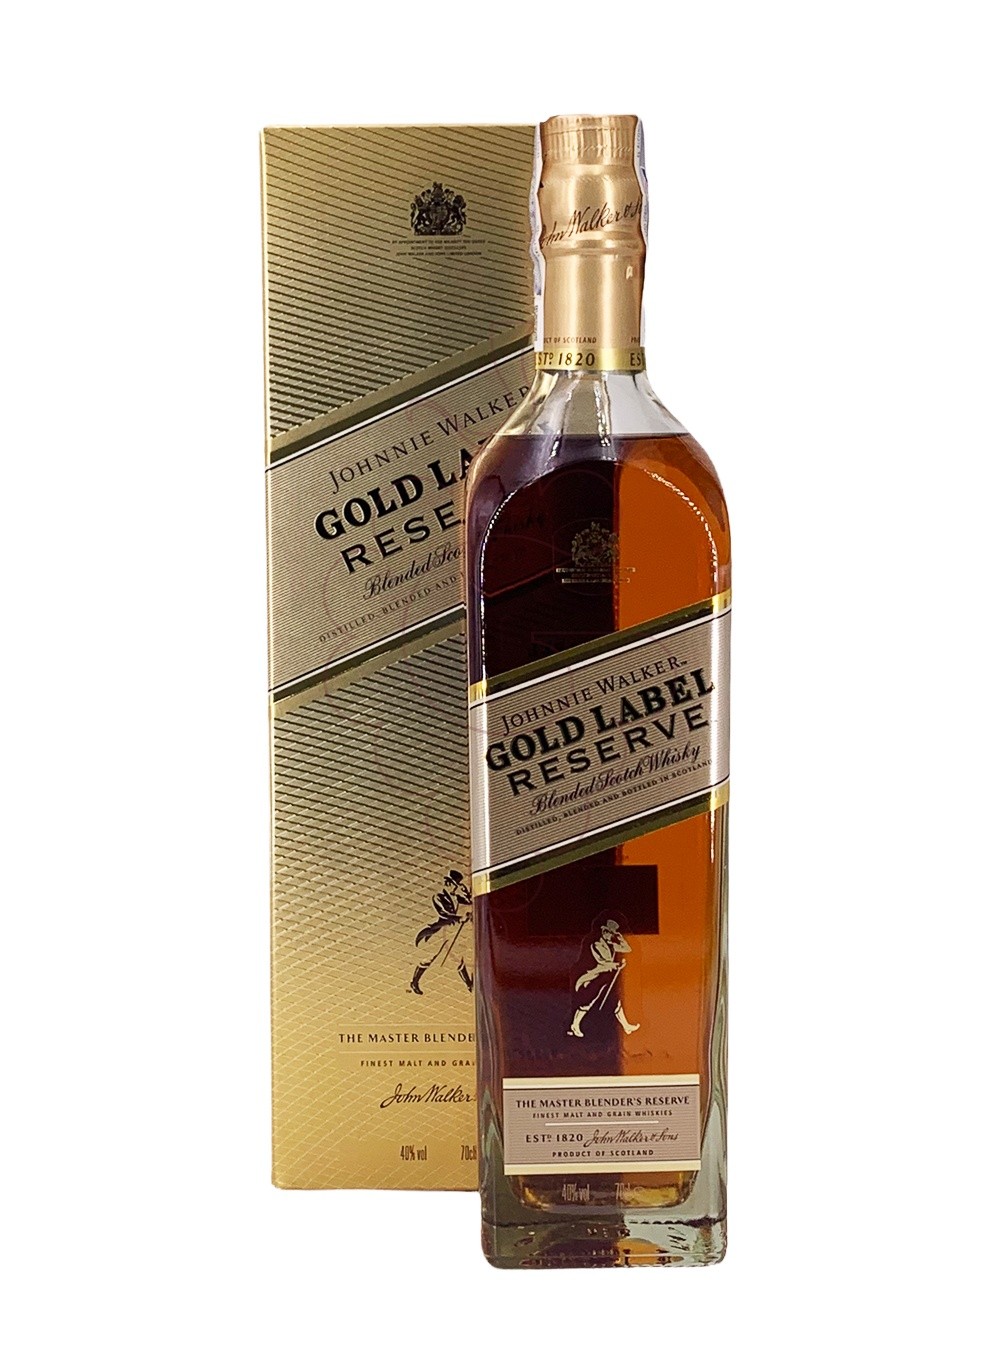 Where to buy Johnnie Walker Gold Label Reserve Blended Scotch Whisky,  Scotland